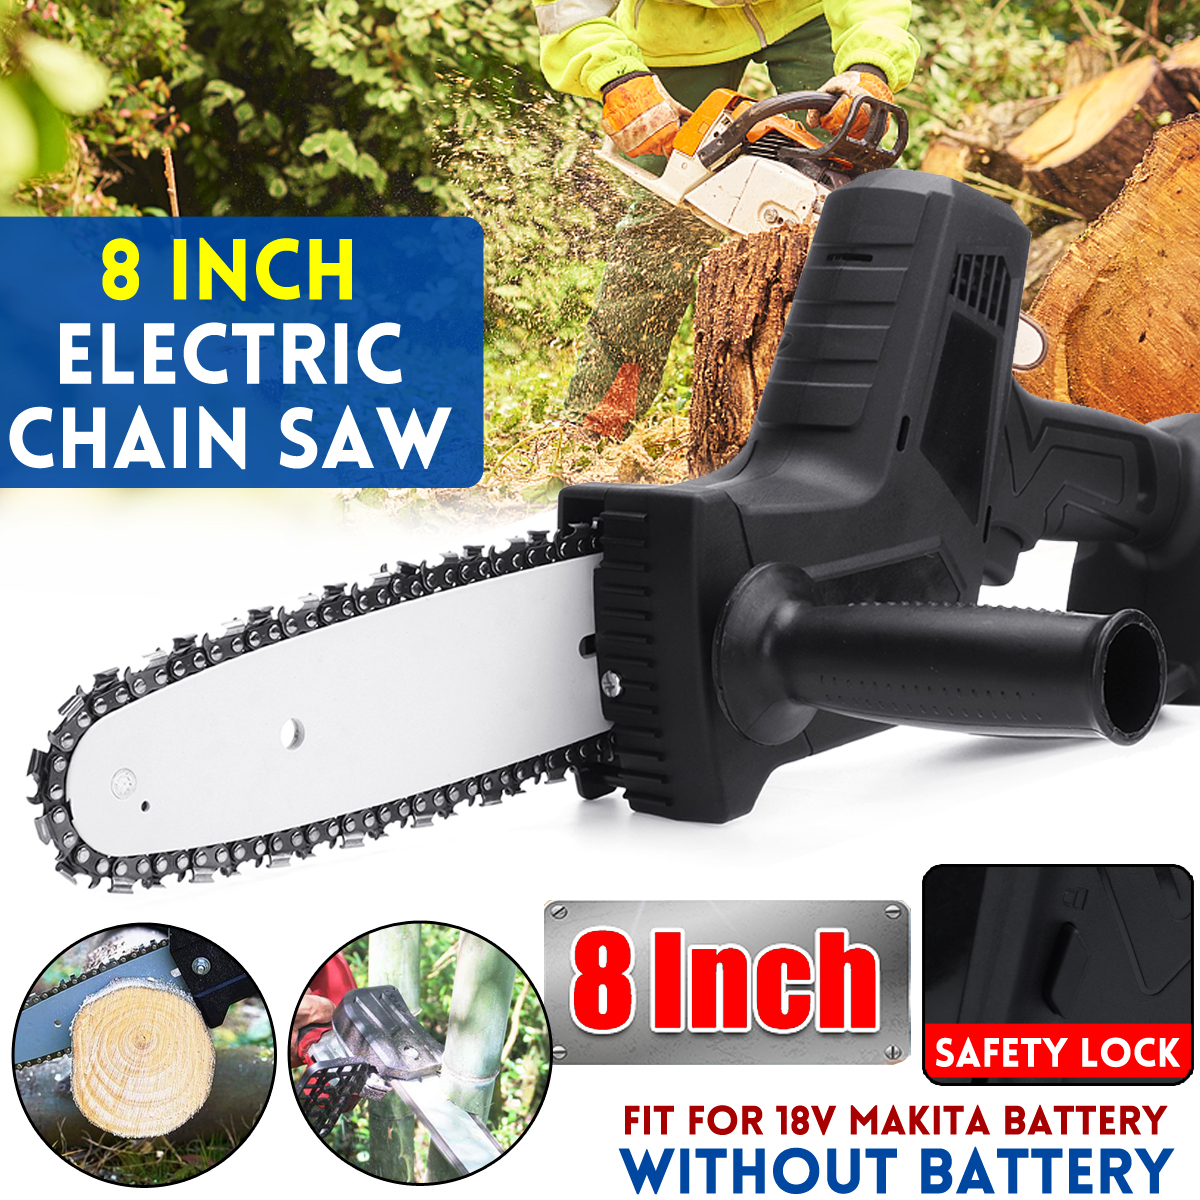 1080W-8-Inch-500rmin-Electric-Chain-Saw-Wood-Cutter-Portable-Electric-Saw-For-Makita-18V-Battery-1746024-1